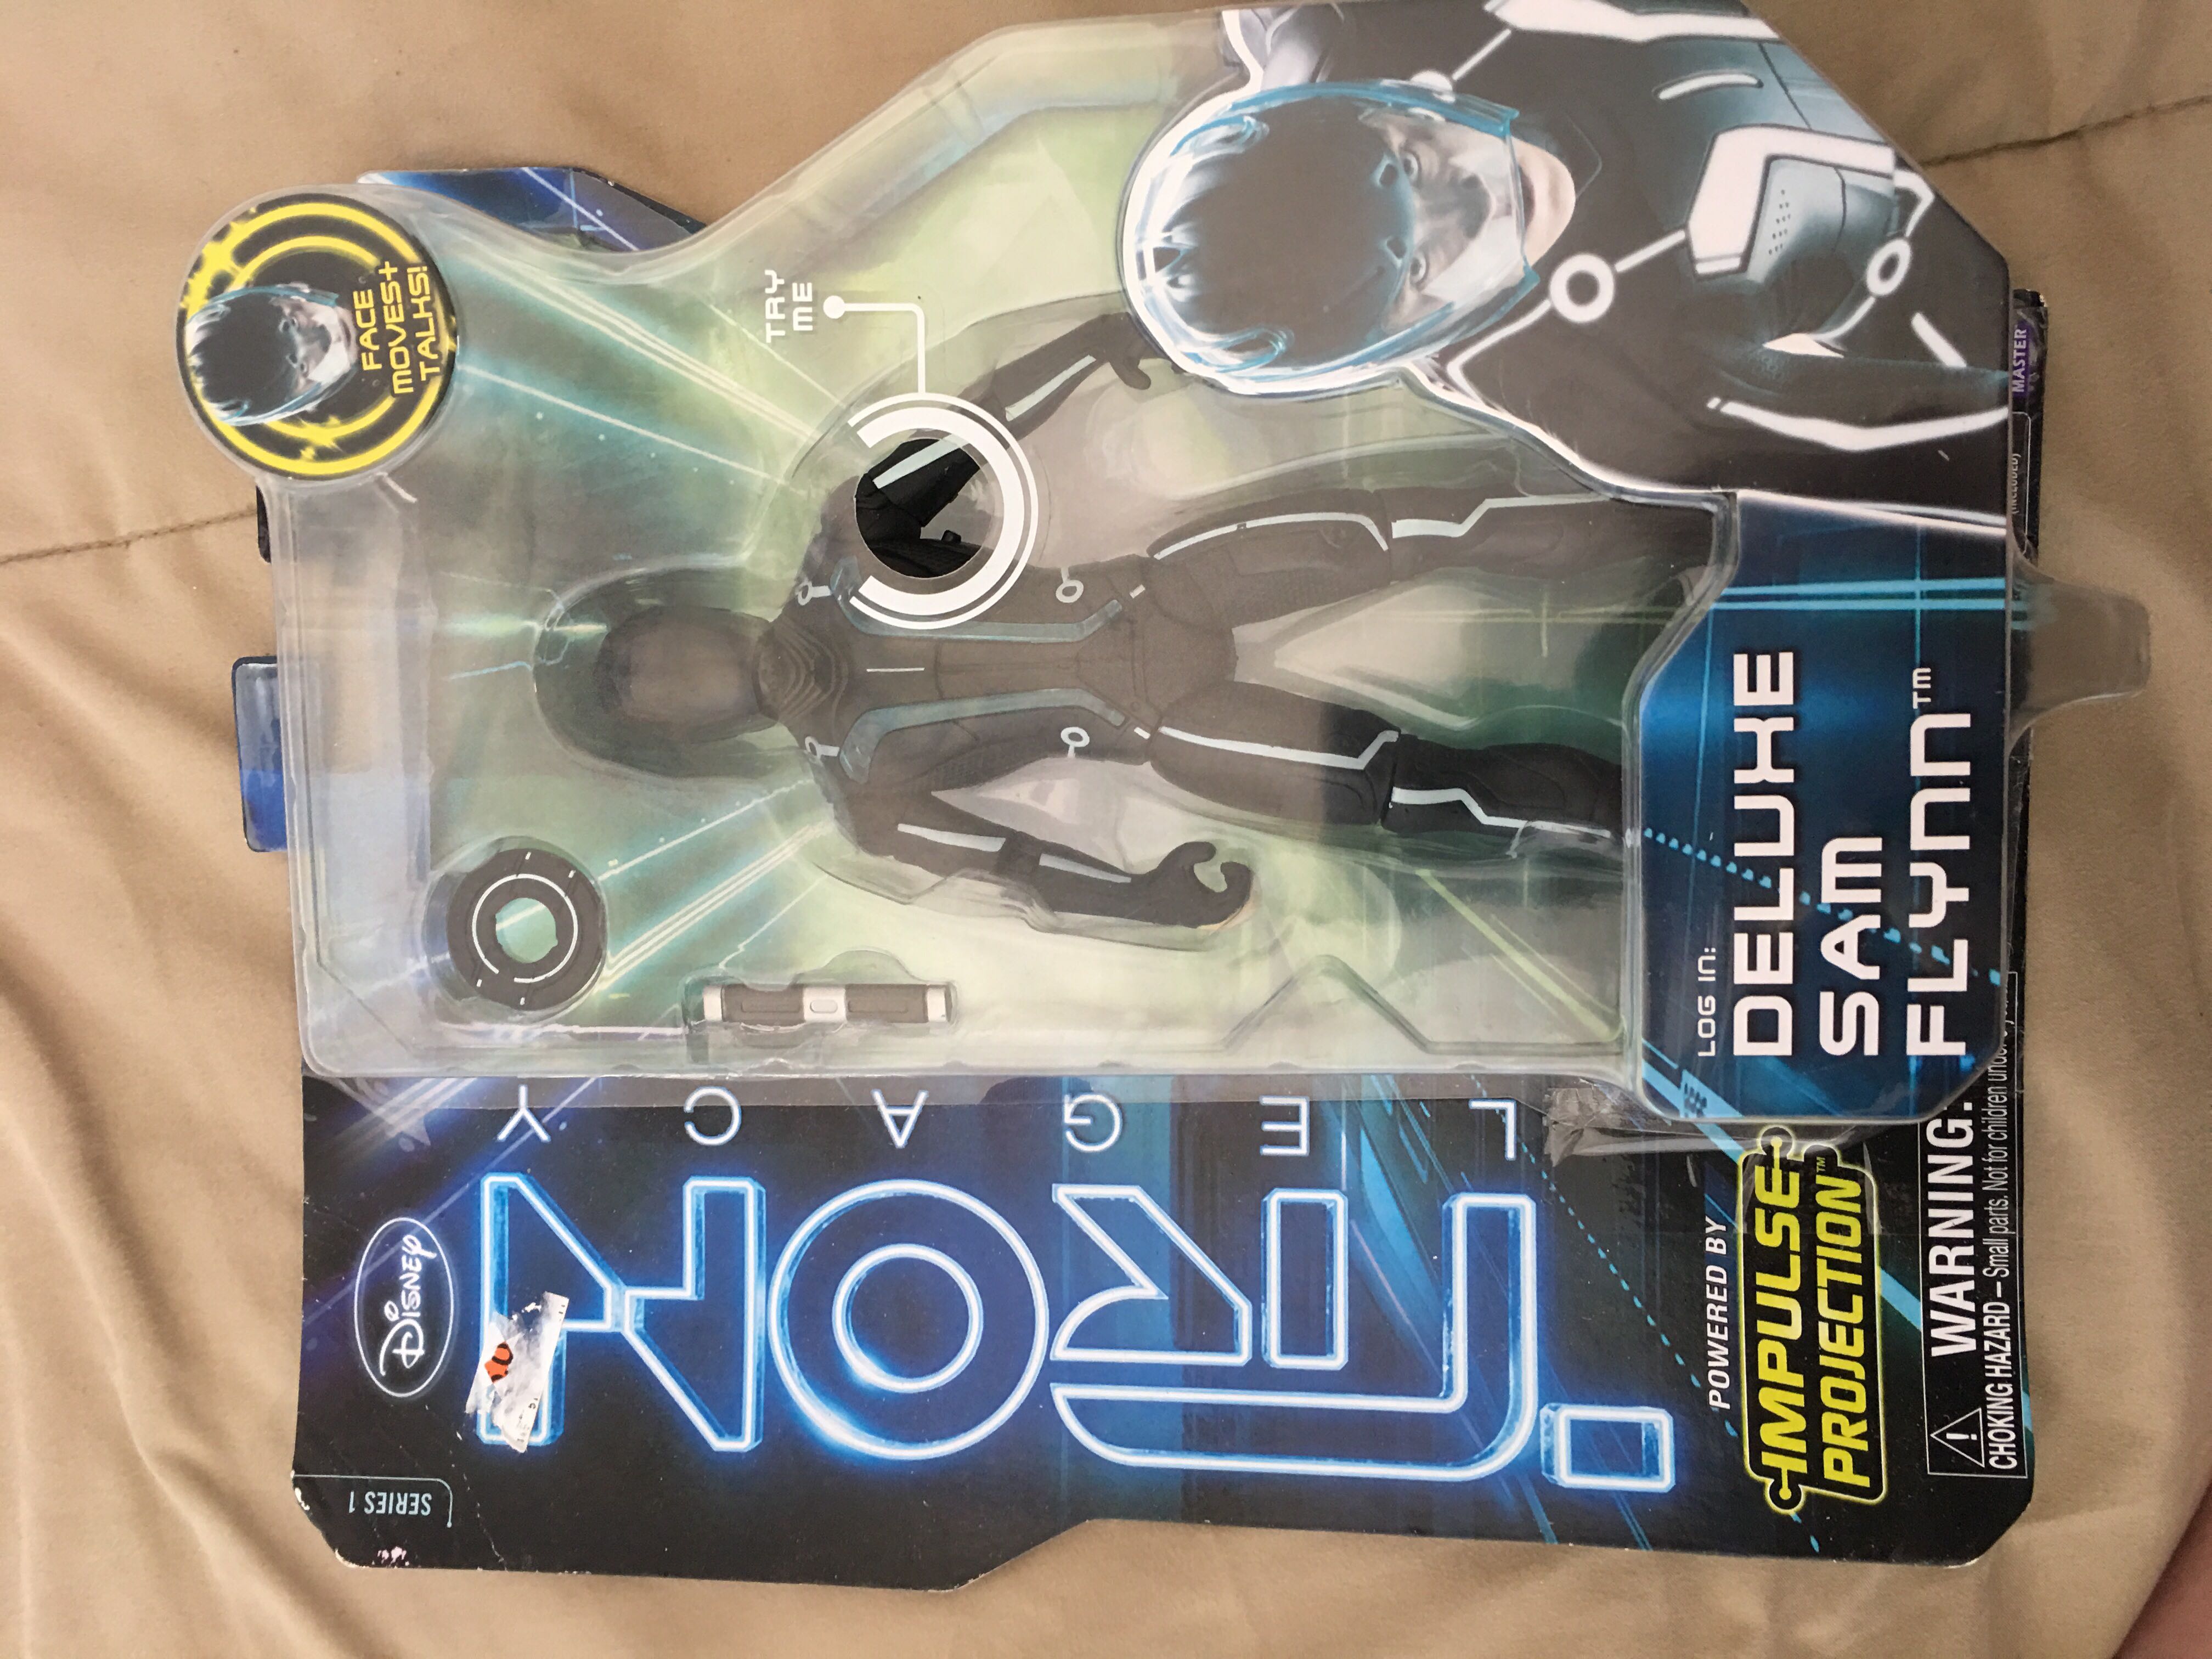 Tron Sam Flynn - Spin Master (Tron) action figure collectible [Barcode 778988870754] - Main Image 1